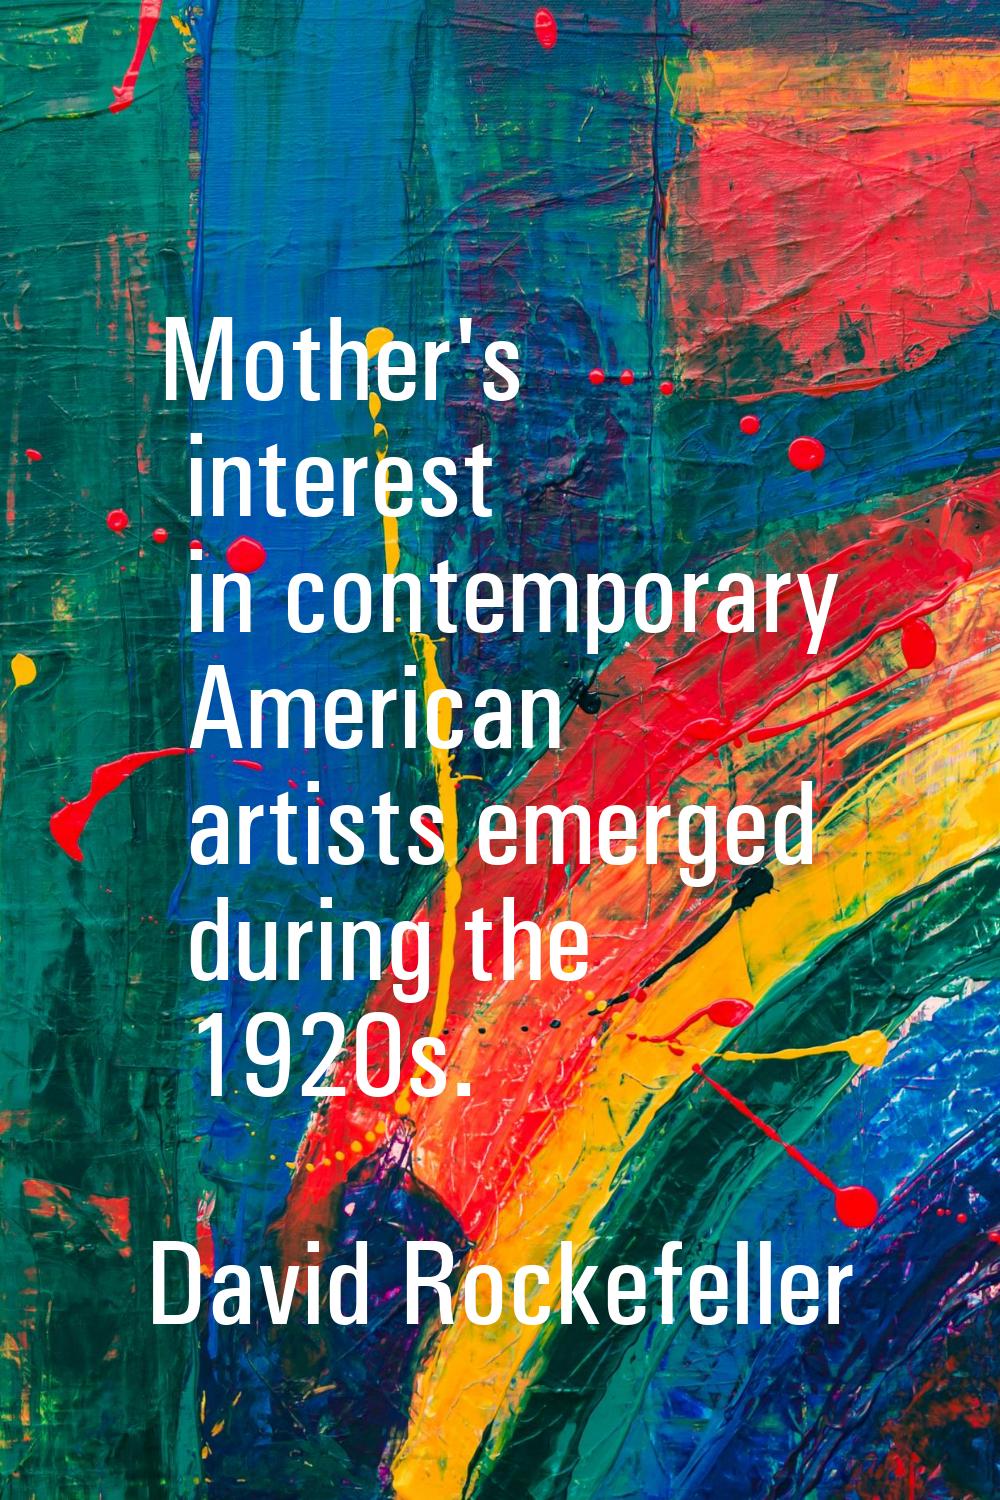 Mother's interest in contemporary American artists emerged during the 1920s.